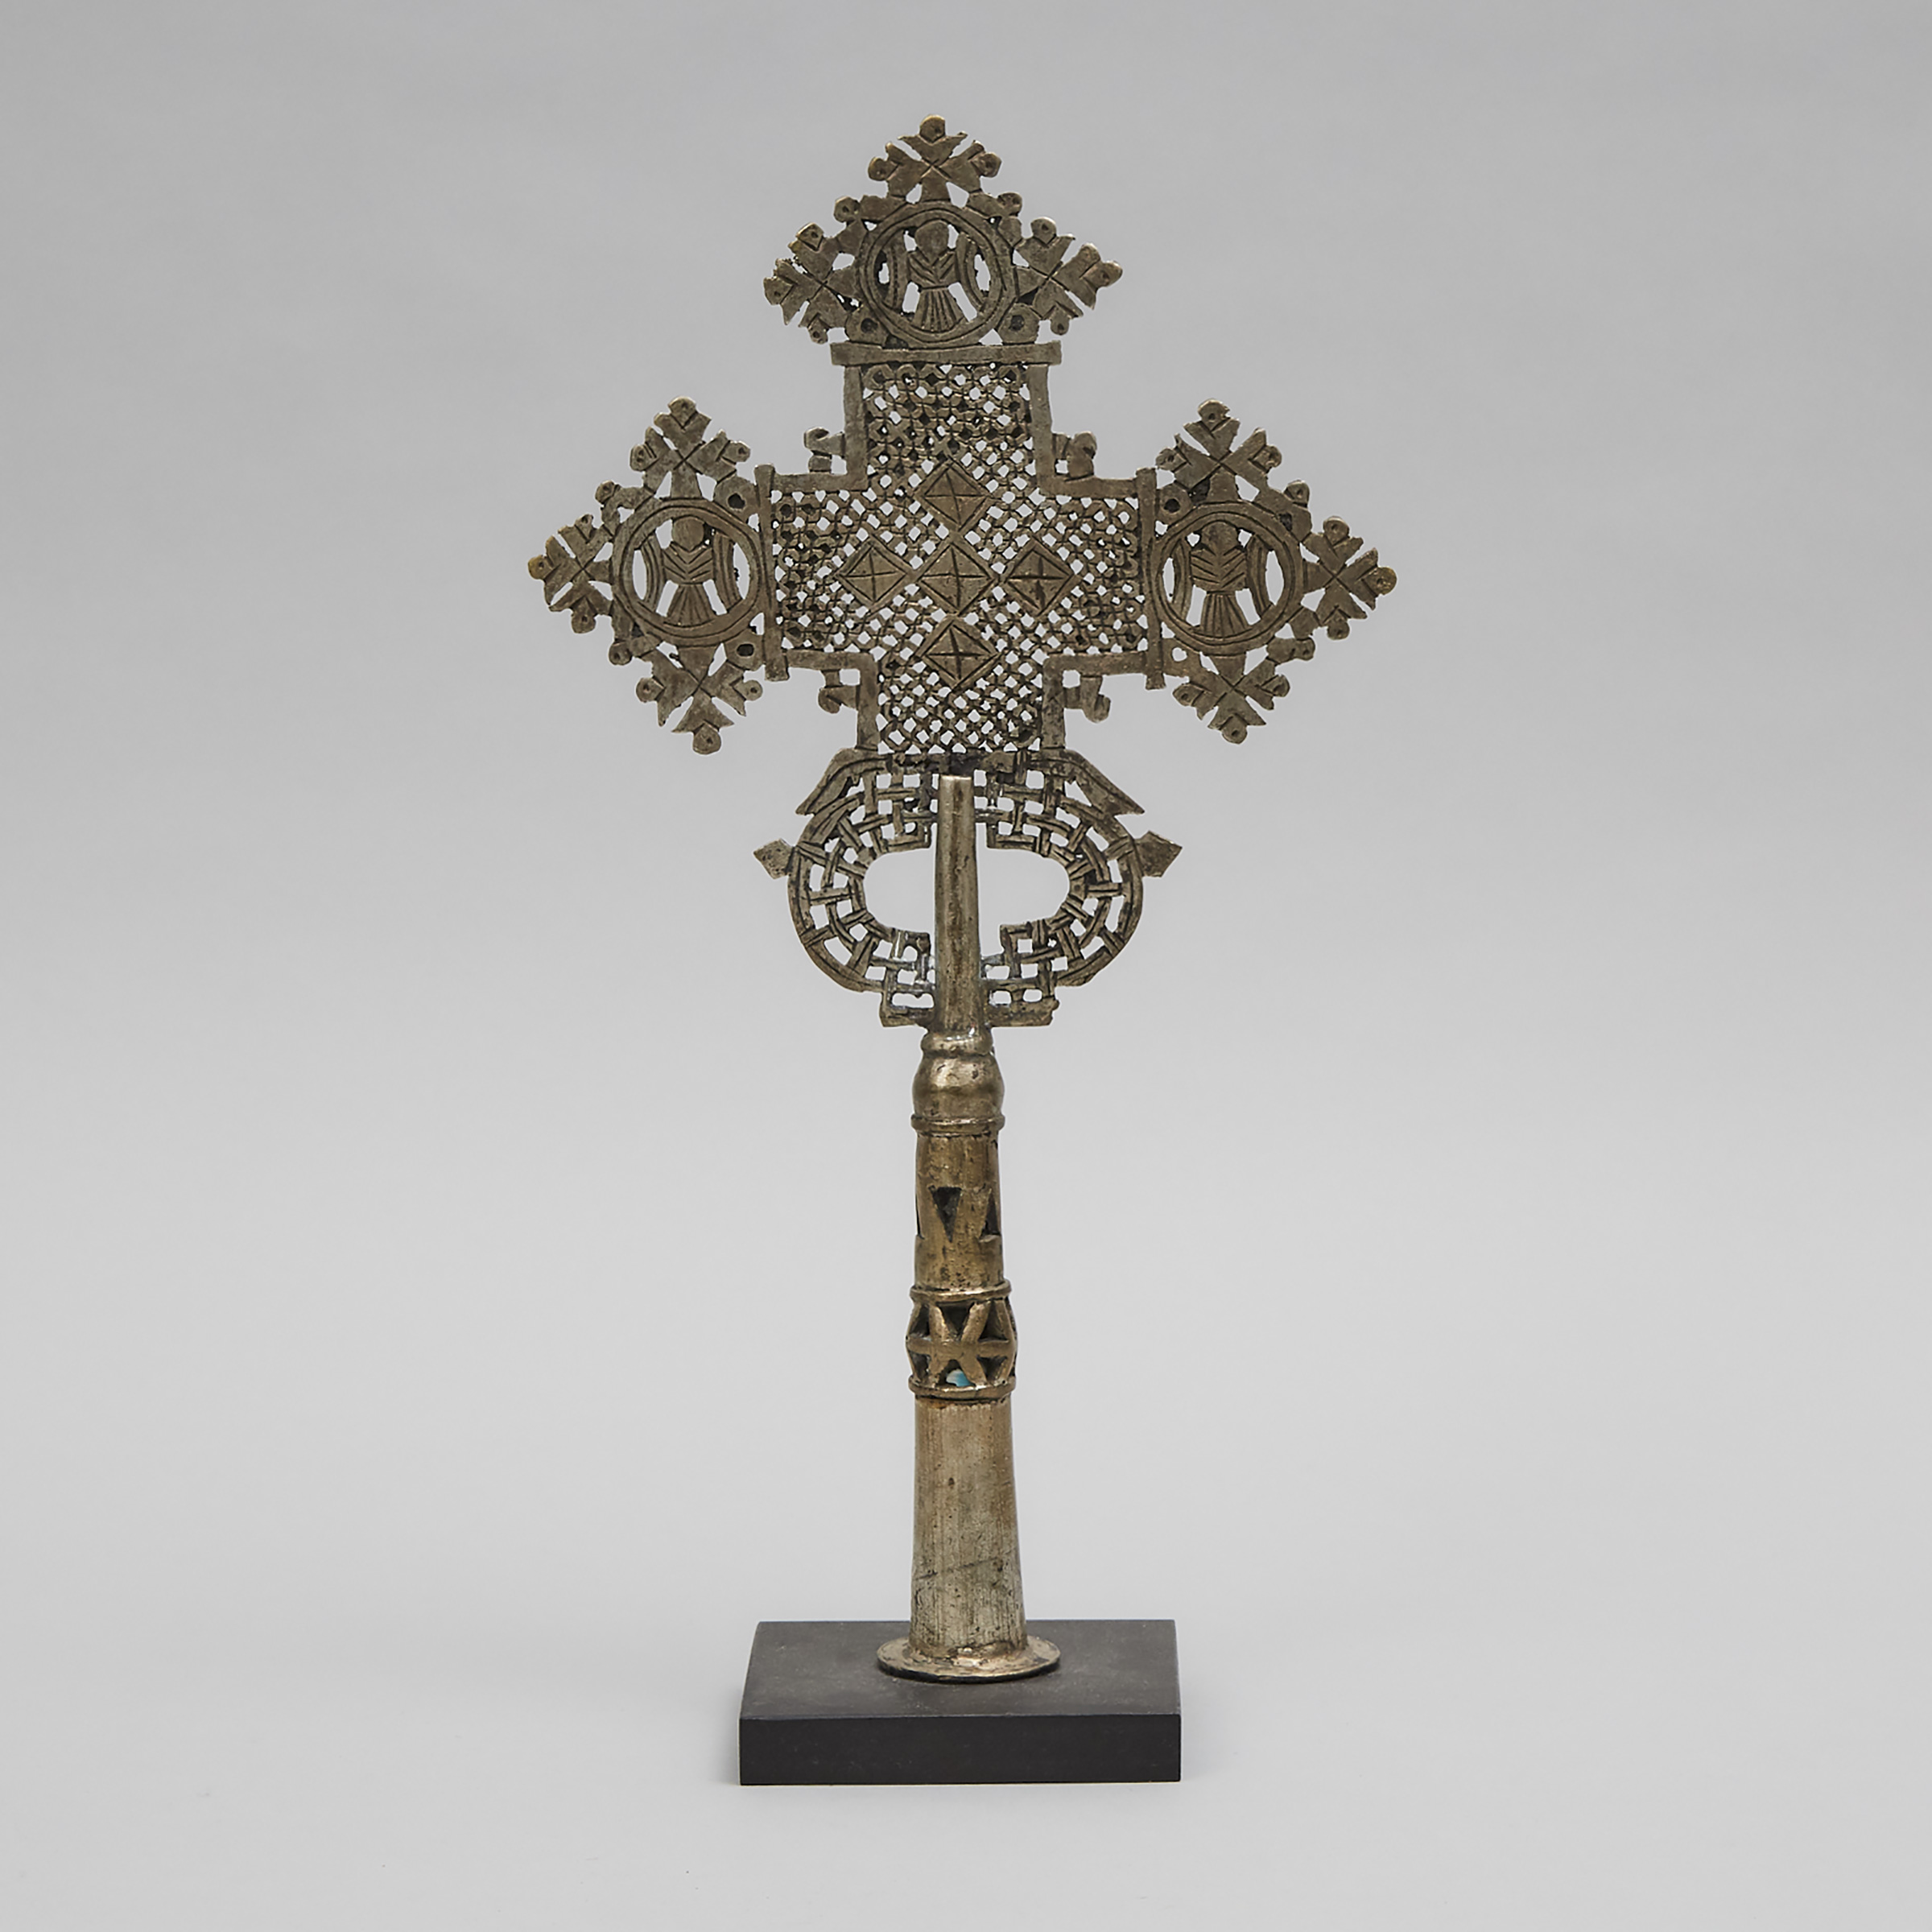 Abyssinian/Ethiopian Silvered Brass Coptic Procession Cross, early-mid 20th century